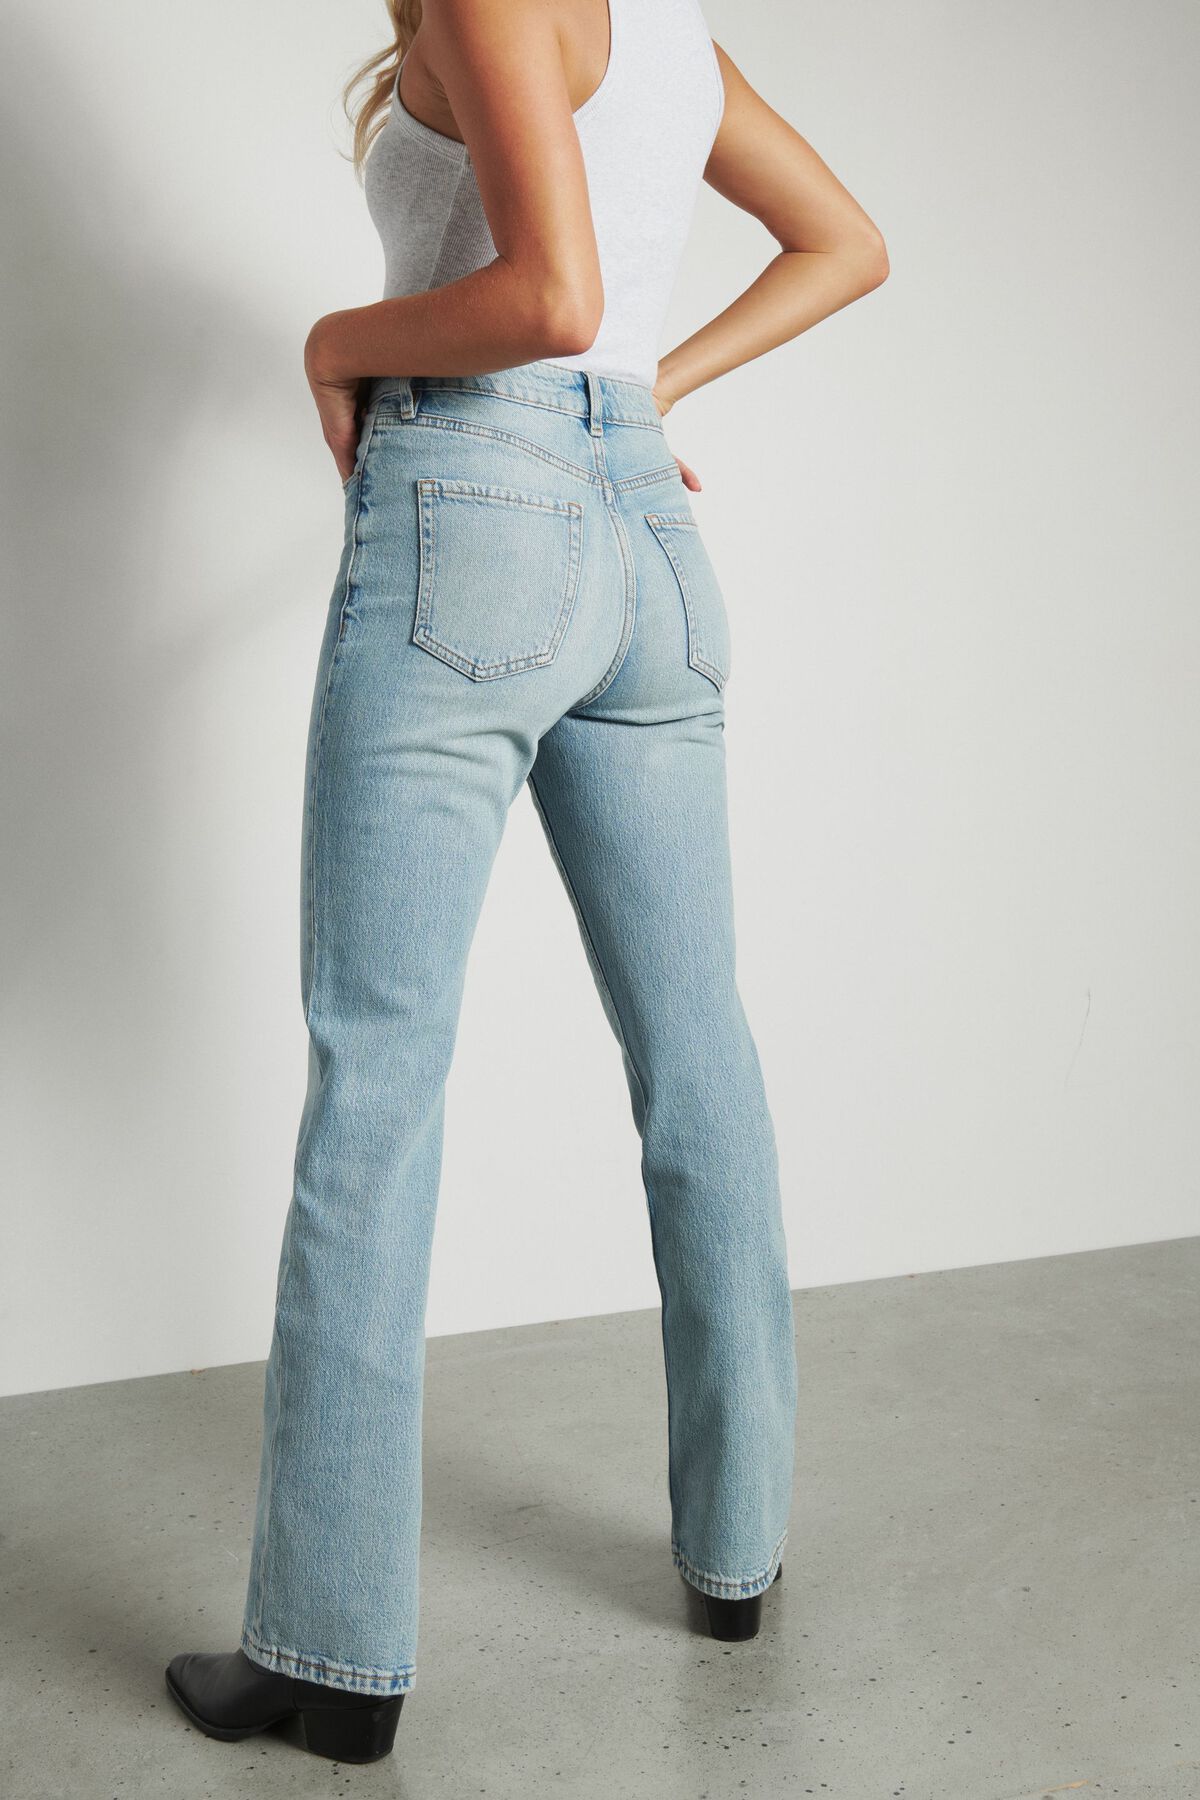 Dynamite Candice Bootcut Jeans. 6